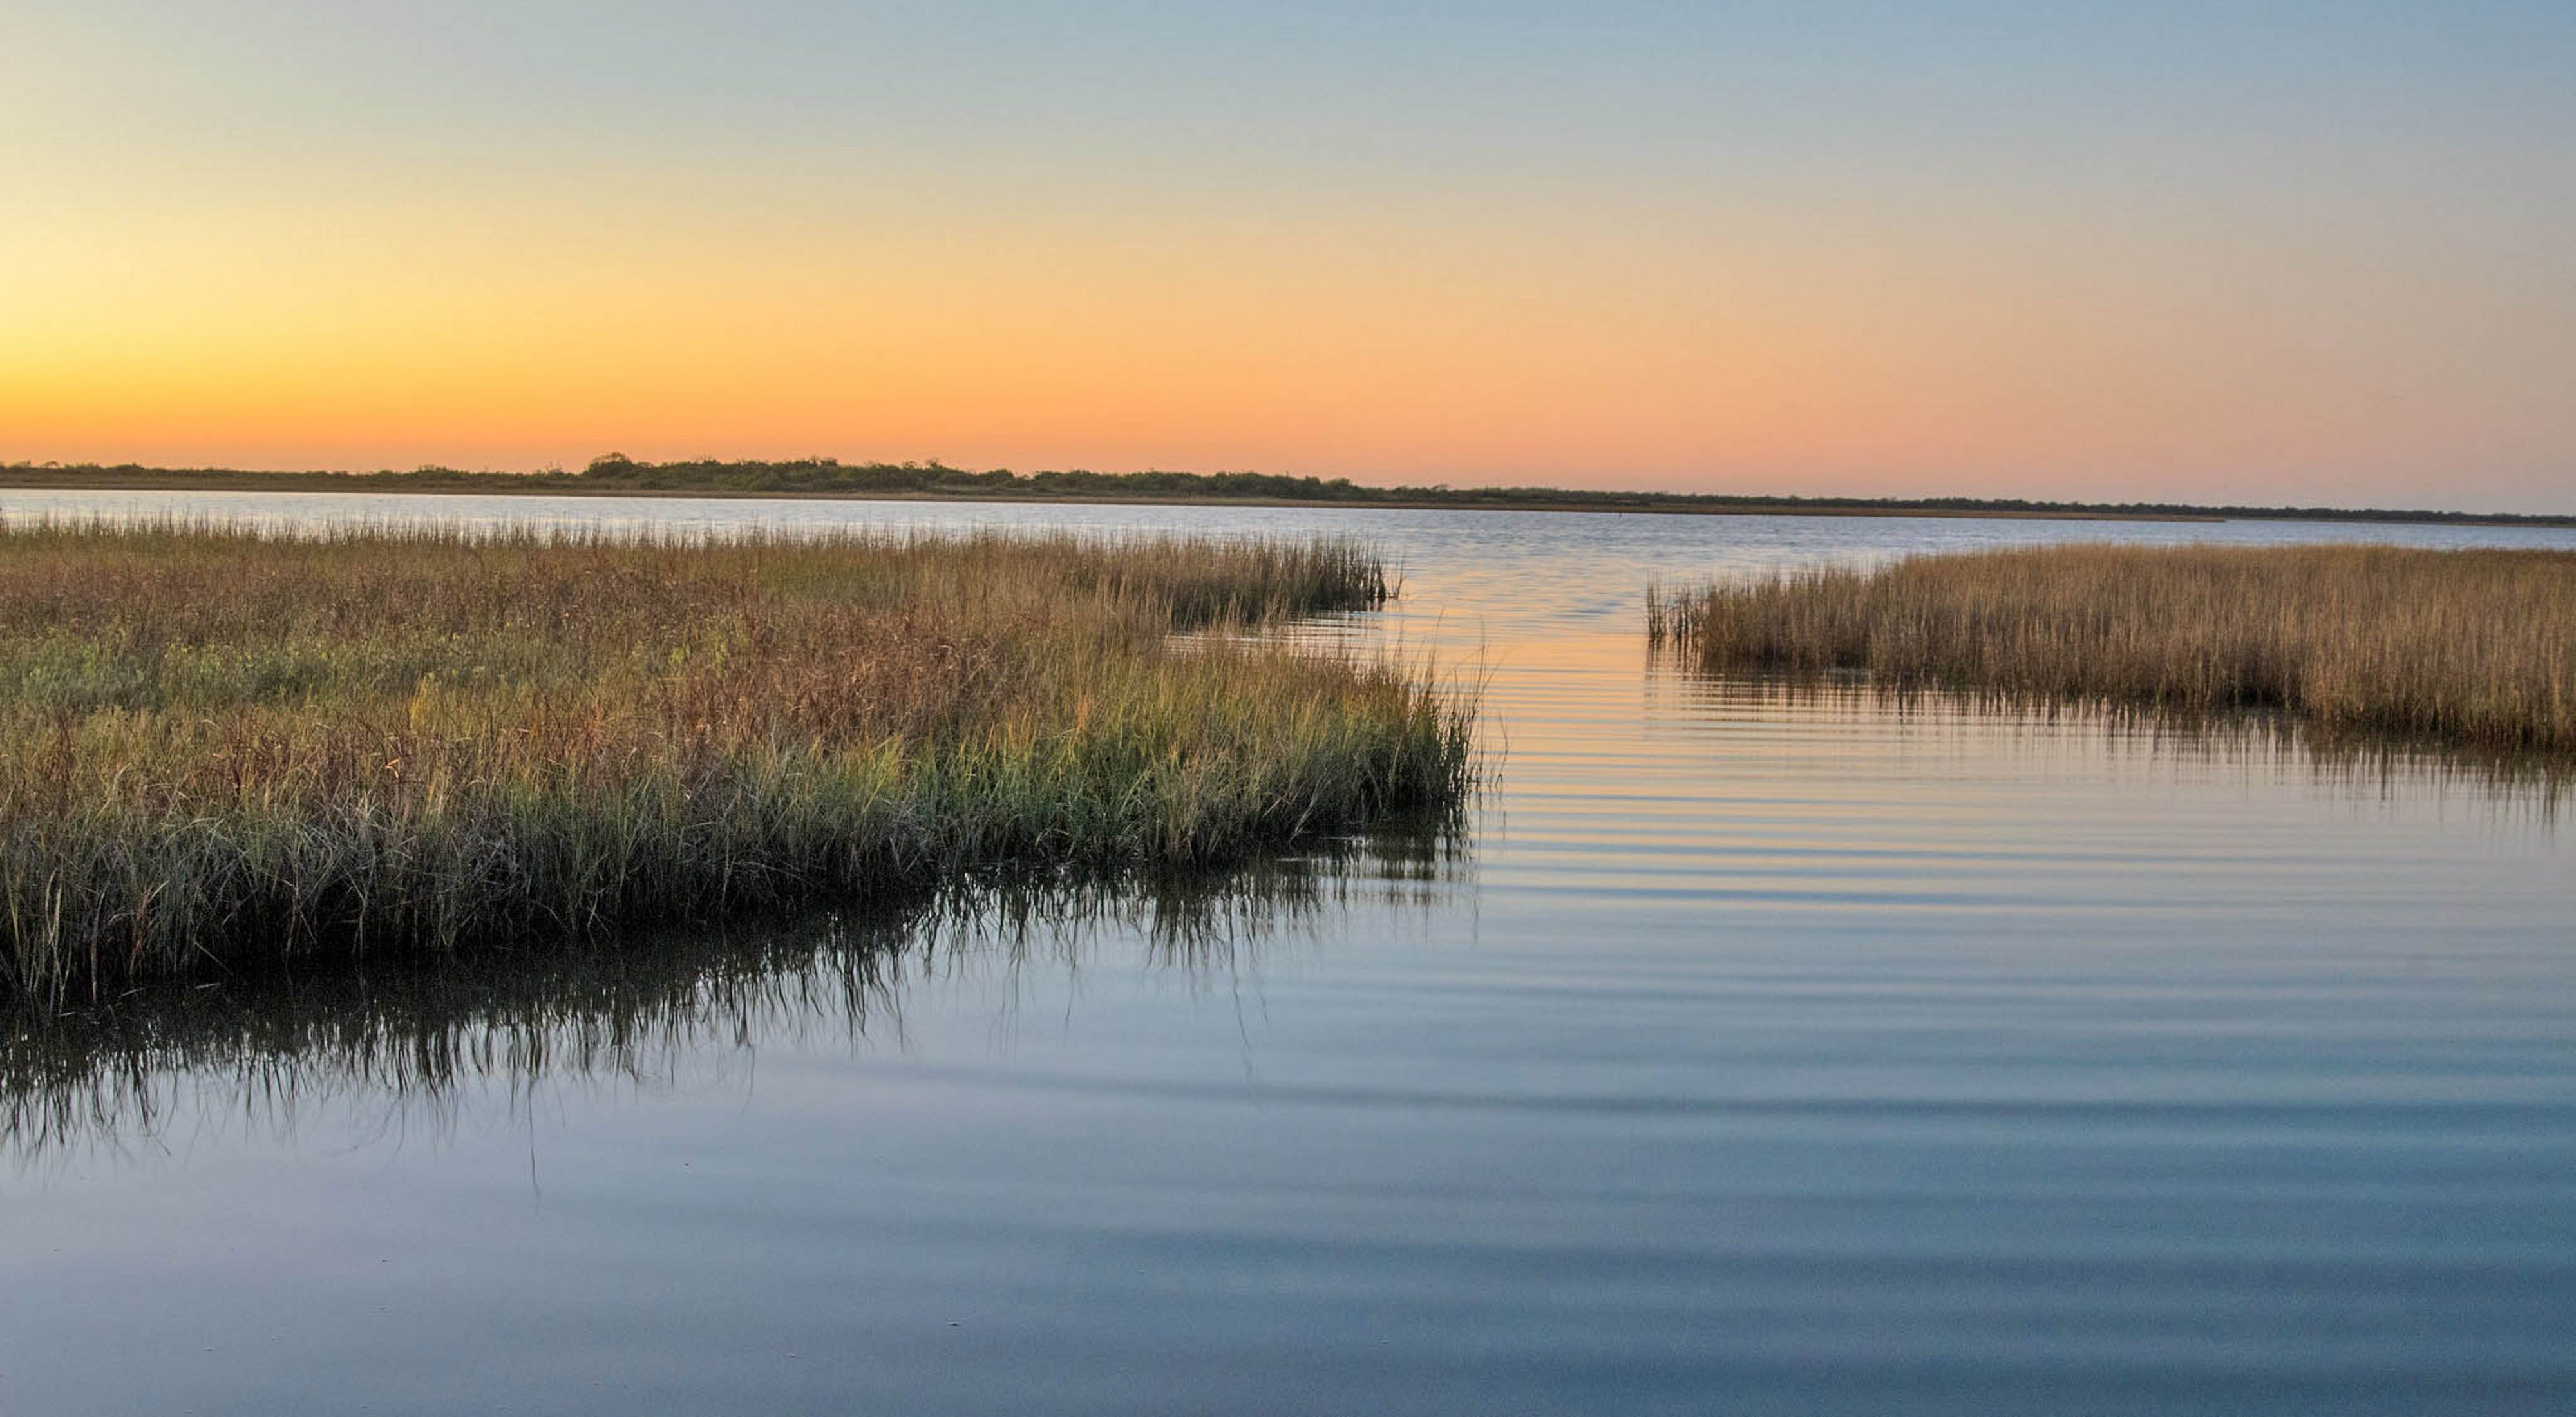 An expanse of dense coastal wetlands intermixed with open water along the Texas Gulf Coast at sunset; the sky is orange.